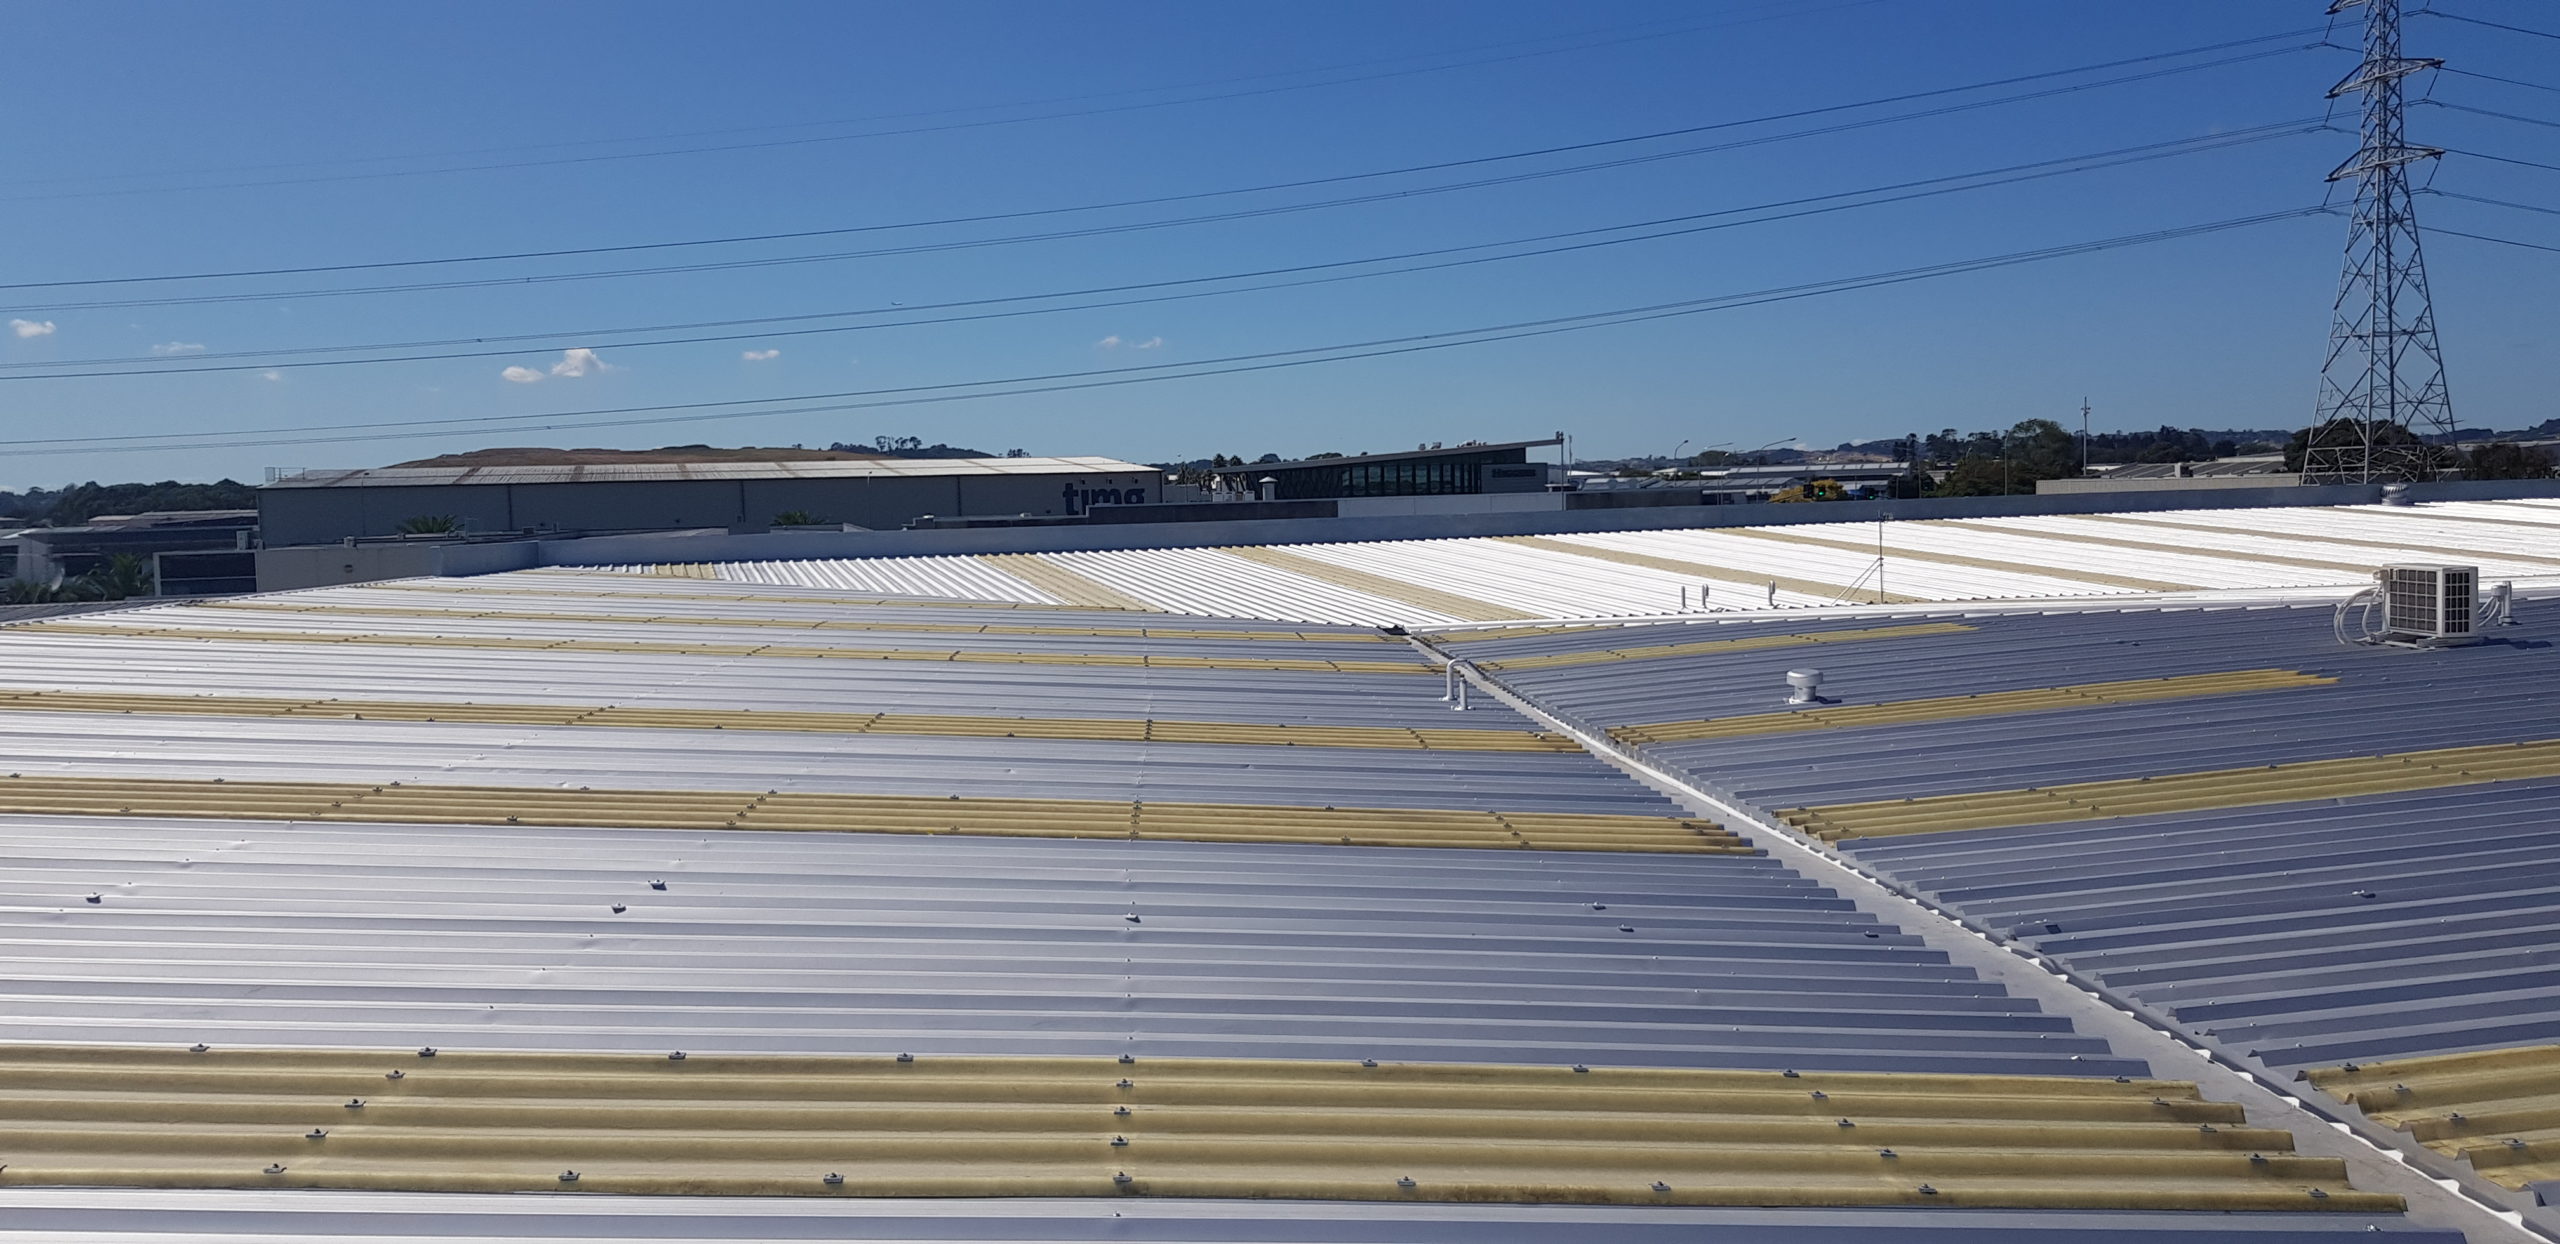 5000sqm commercial roof with gilsonite coating scaled - Commercial iron roof coating